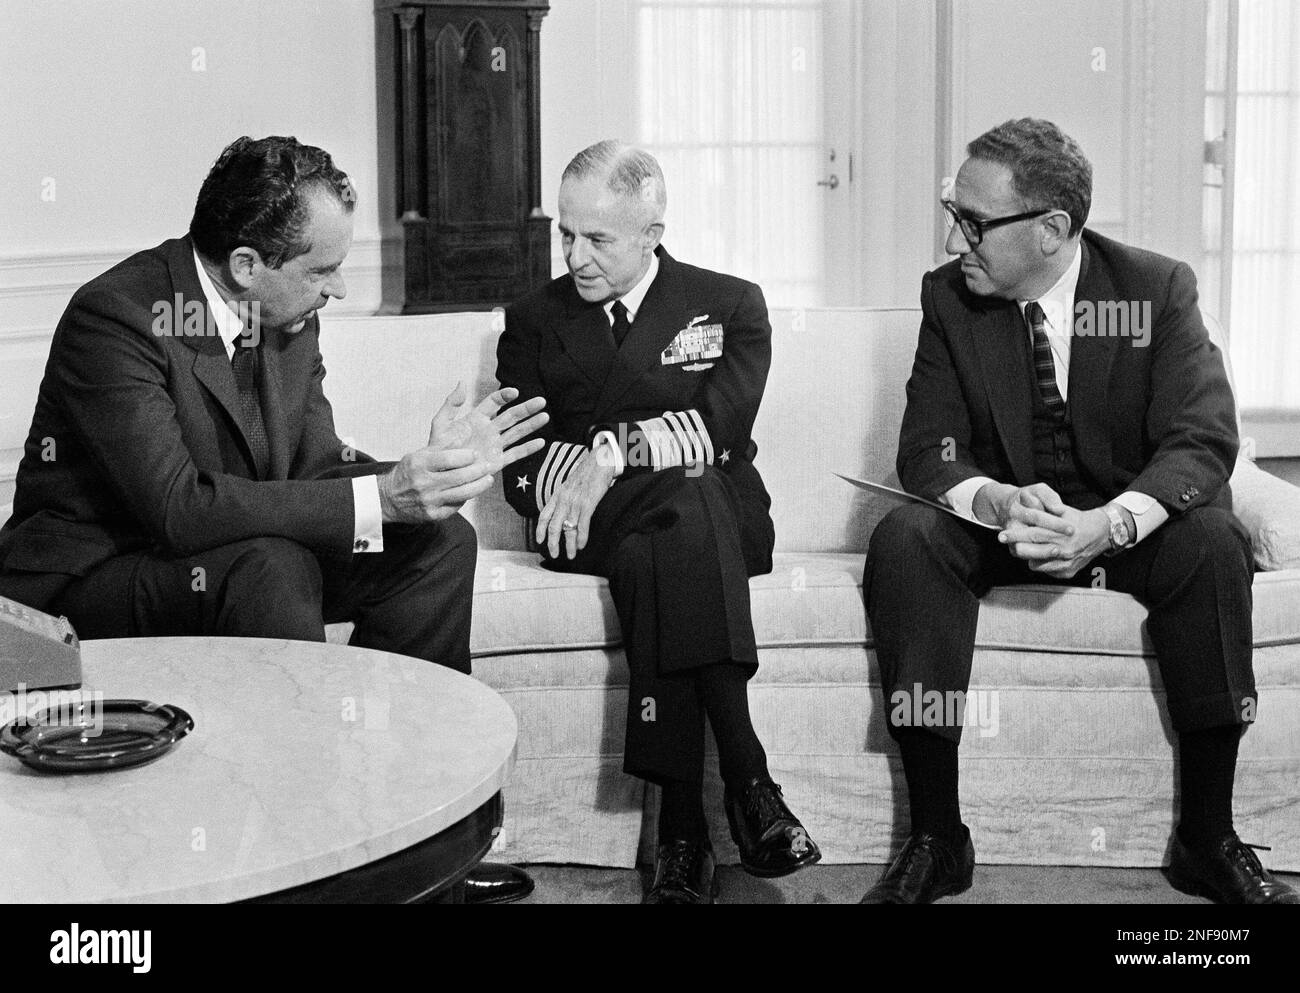 U.S. President Richard Nixon conferred at the White House with Adm John McCain, commander in chief of the United States Pacific Forces, Feb. 11, 1969 in Washington. Admiral McCain has been a patient at Bethesda Naval Hospital after suffering a mild stroke last month. At right is Henry Kissinger. (AP Photo) Stock Photo